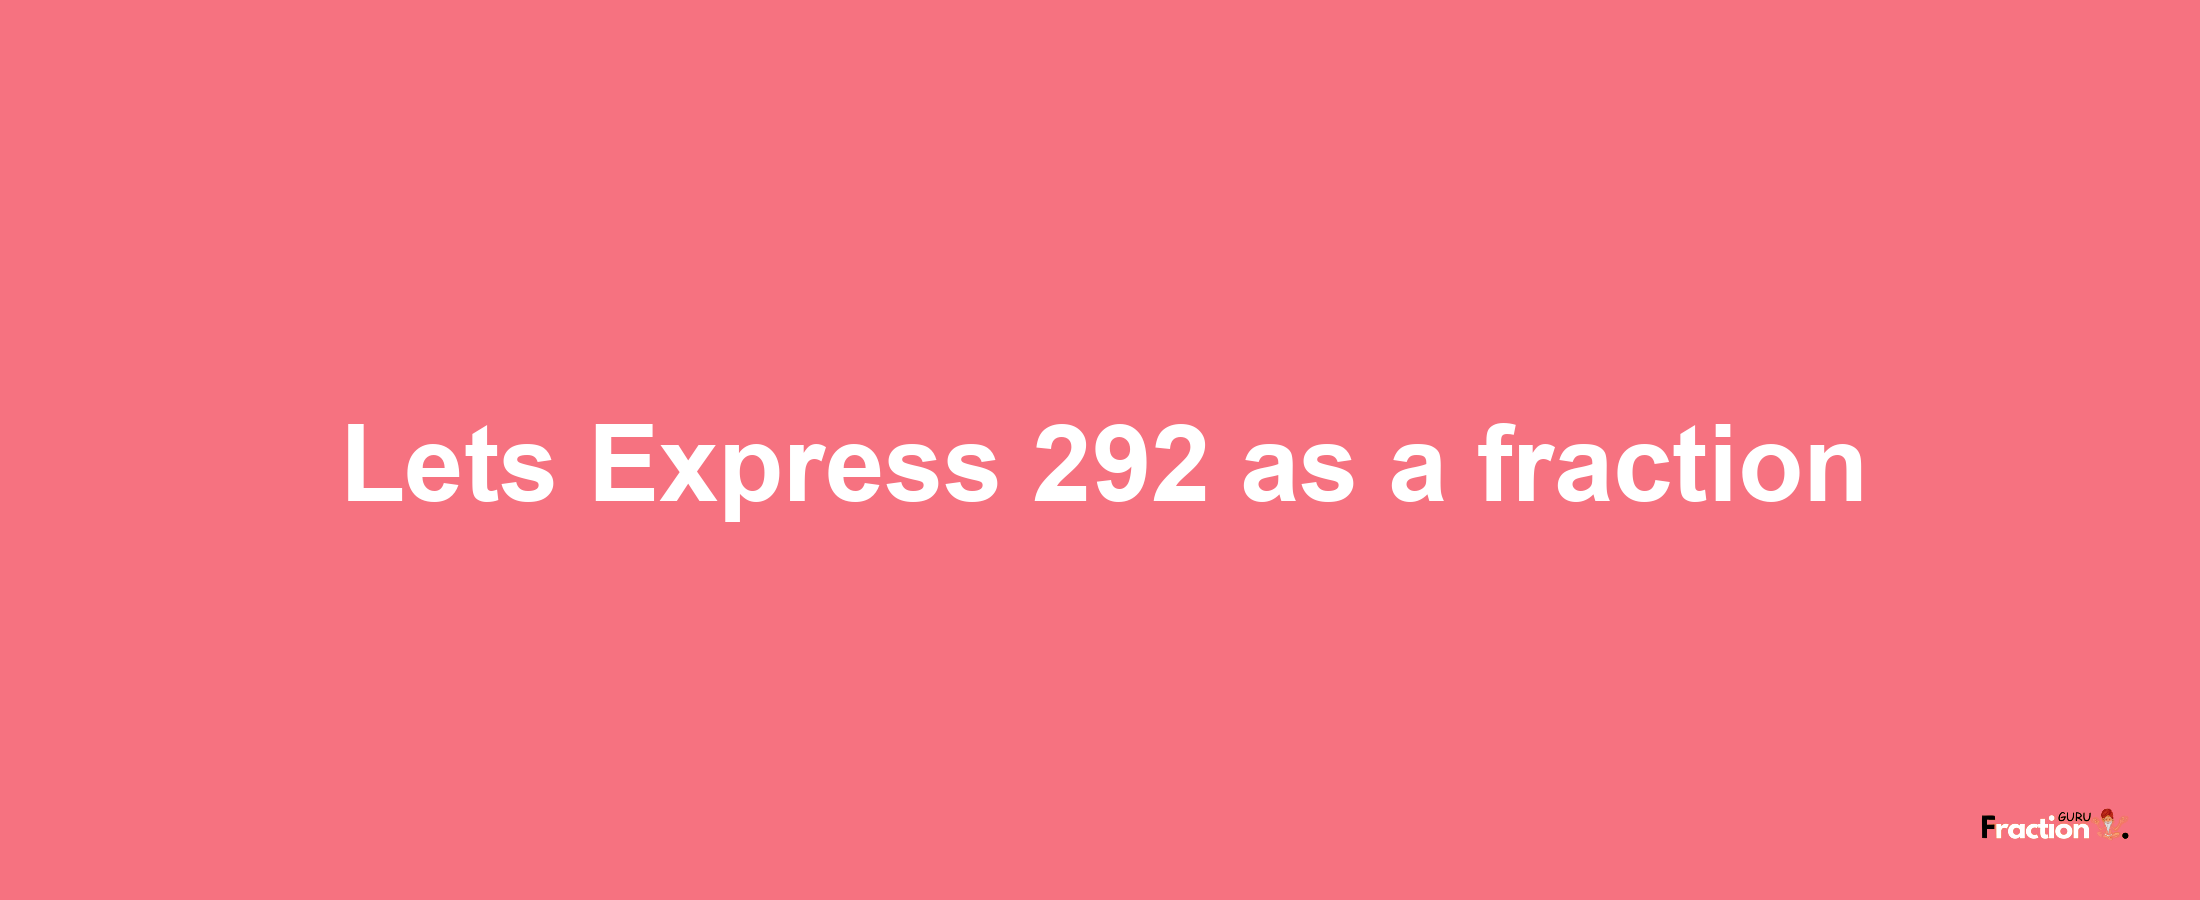 Lets Express 292 as afraction